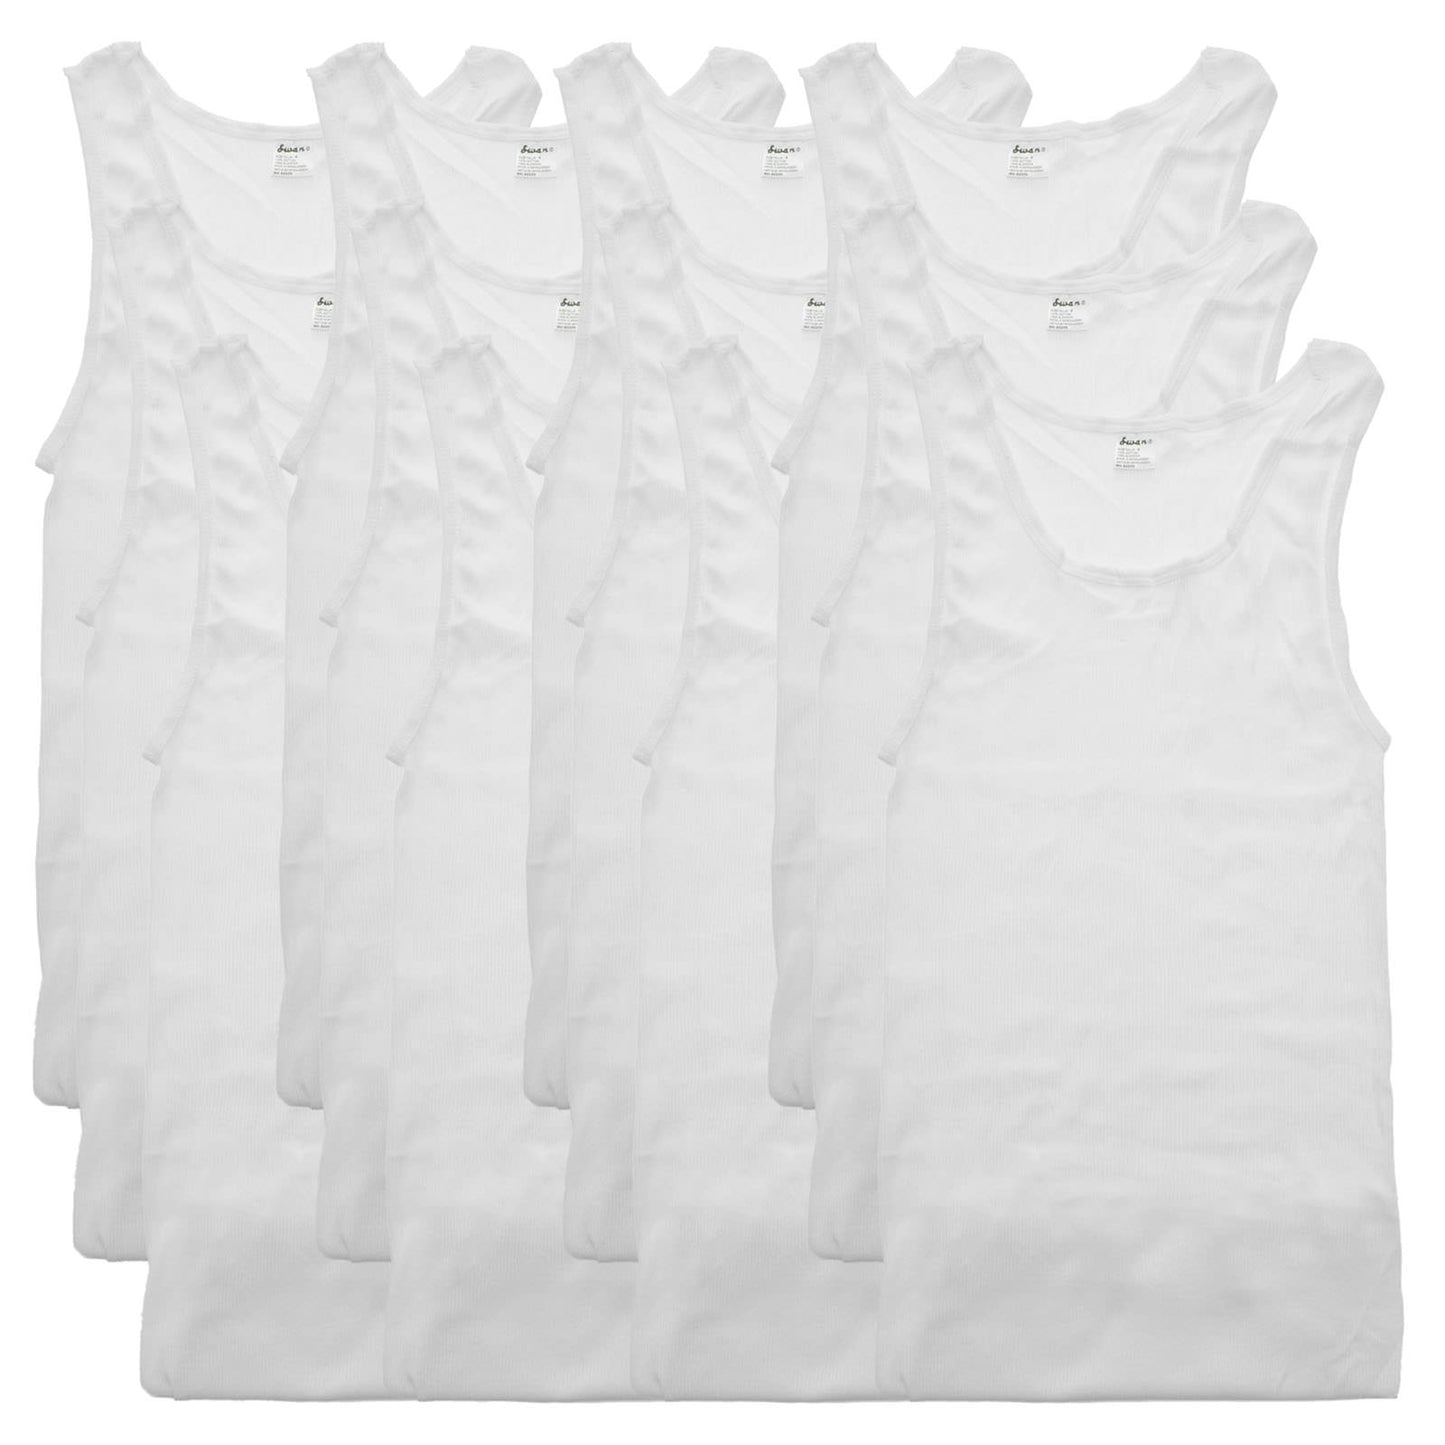 Men's Ribbed White A-Shirts (12-Pack)